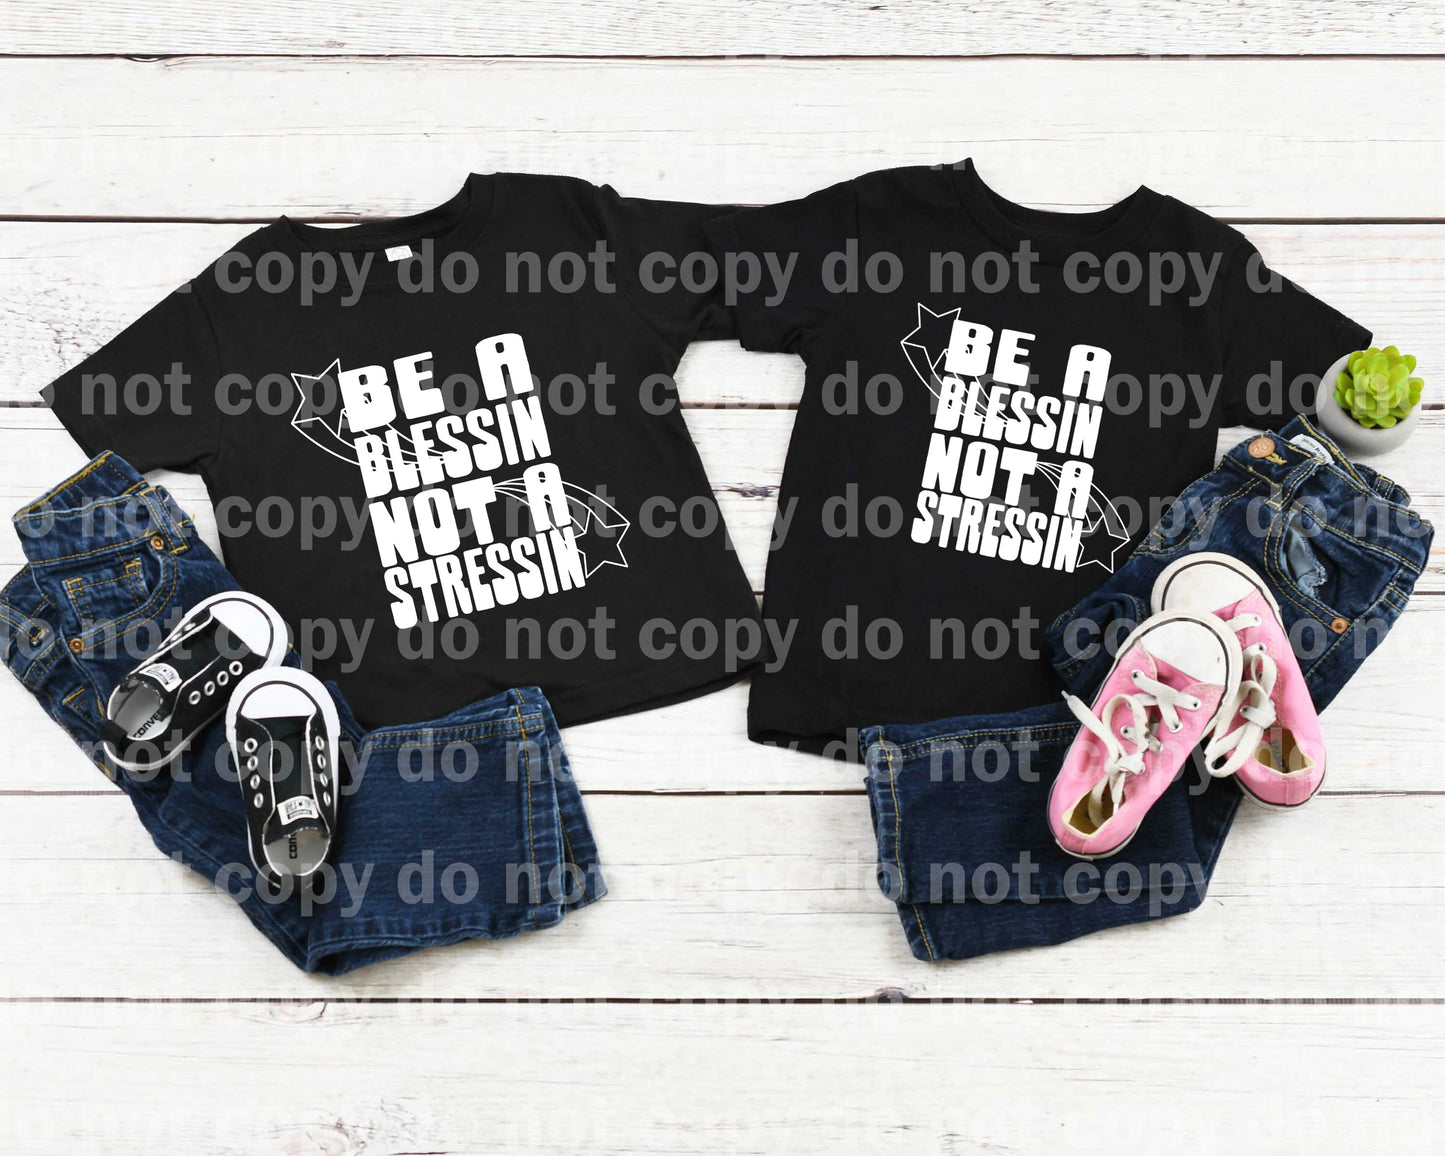 Be A Blessin' Not A Stressin' Black/White Dream Print or Sublimation Print